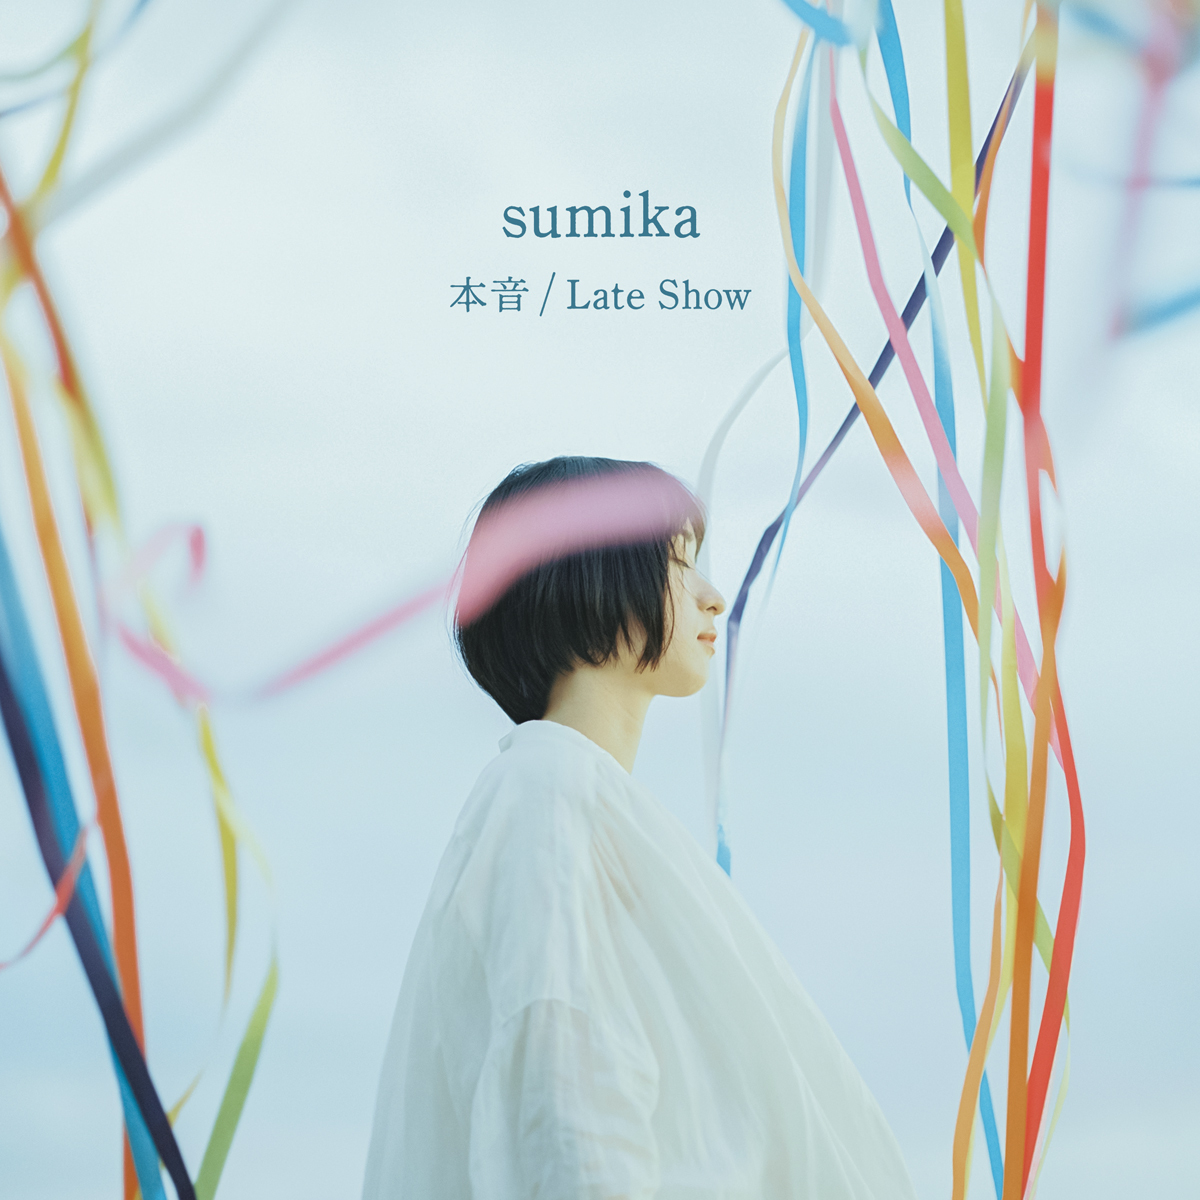 sumika「本音 / Late Show」